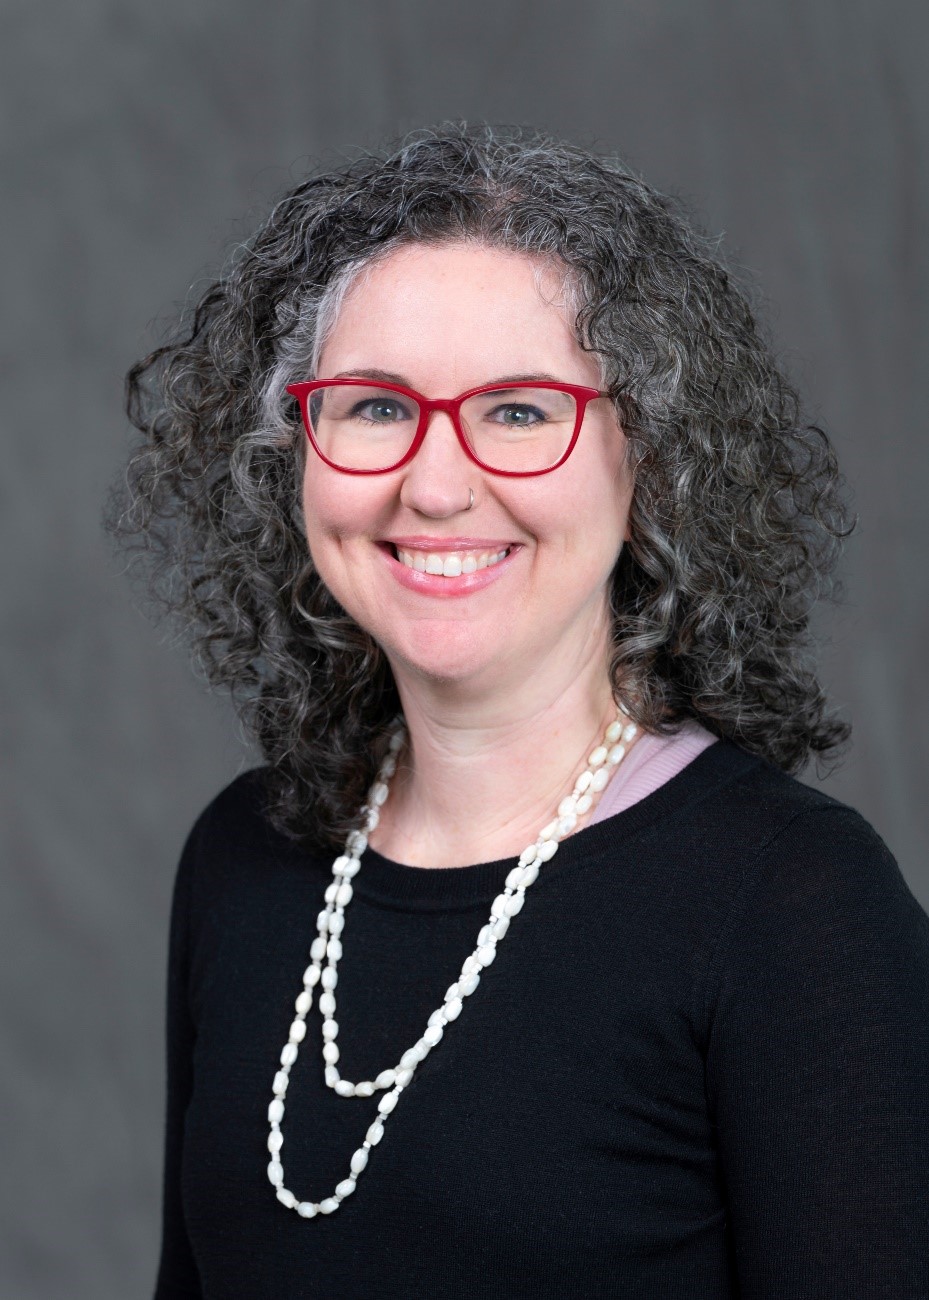 Headshot photo of Sarah Lowry, D.N.P., ACNP-BC, AOCNP, ACHPN